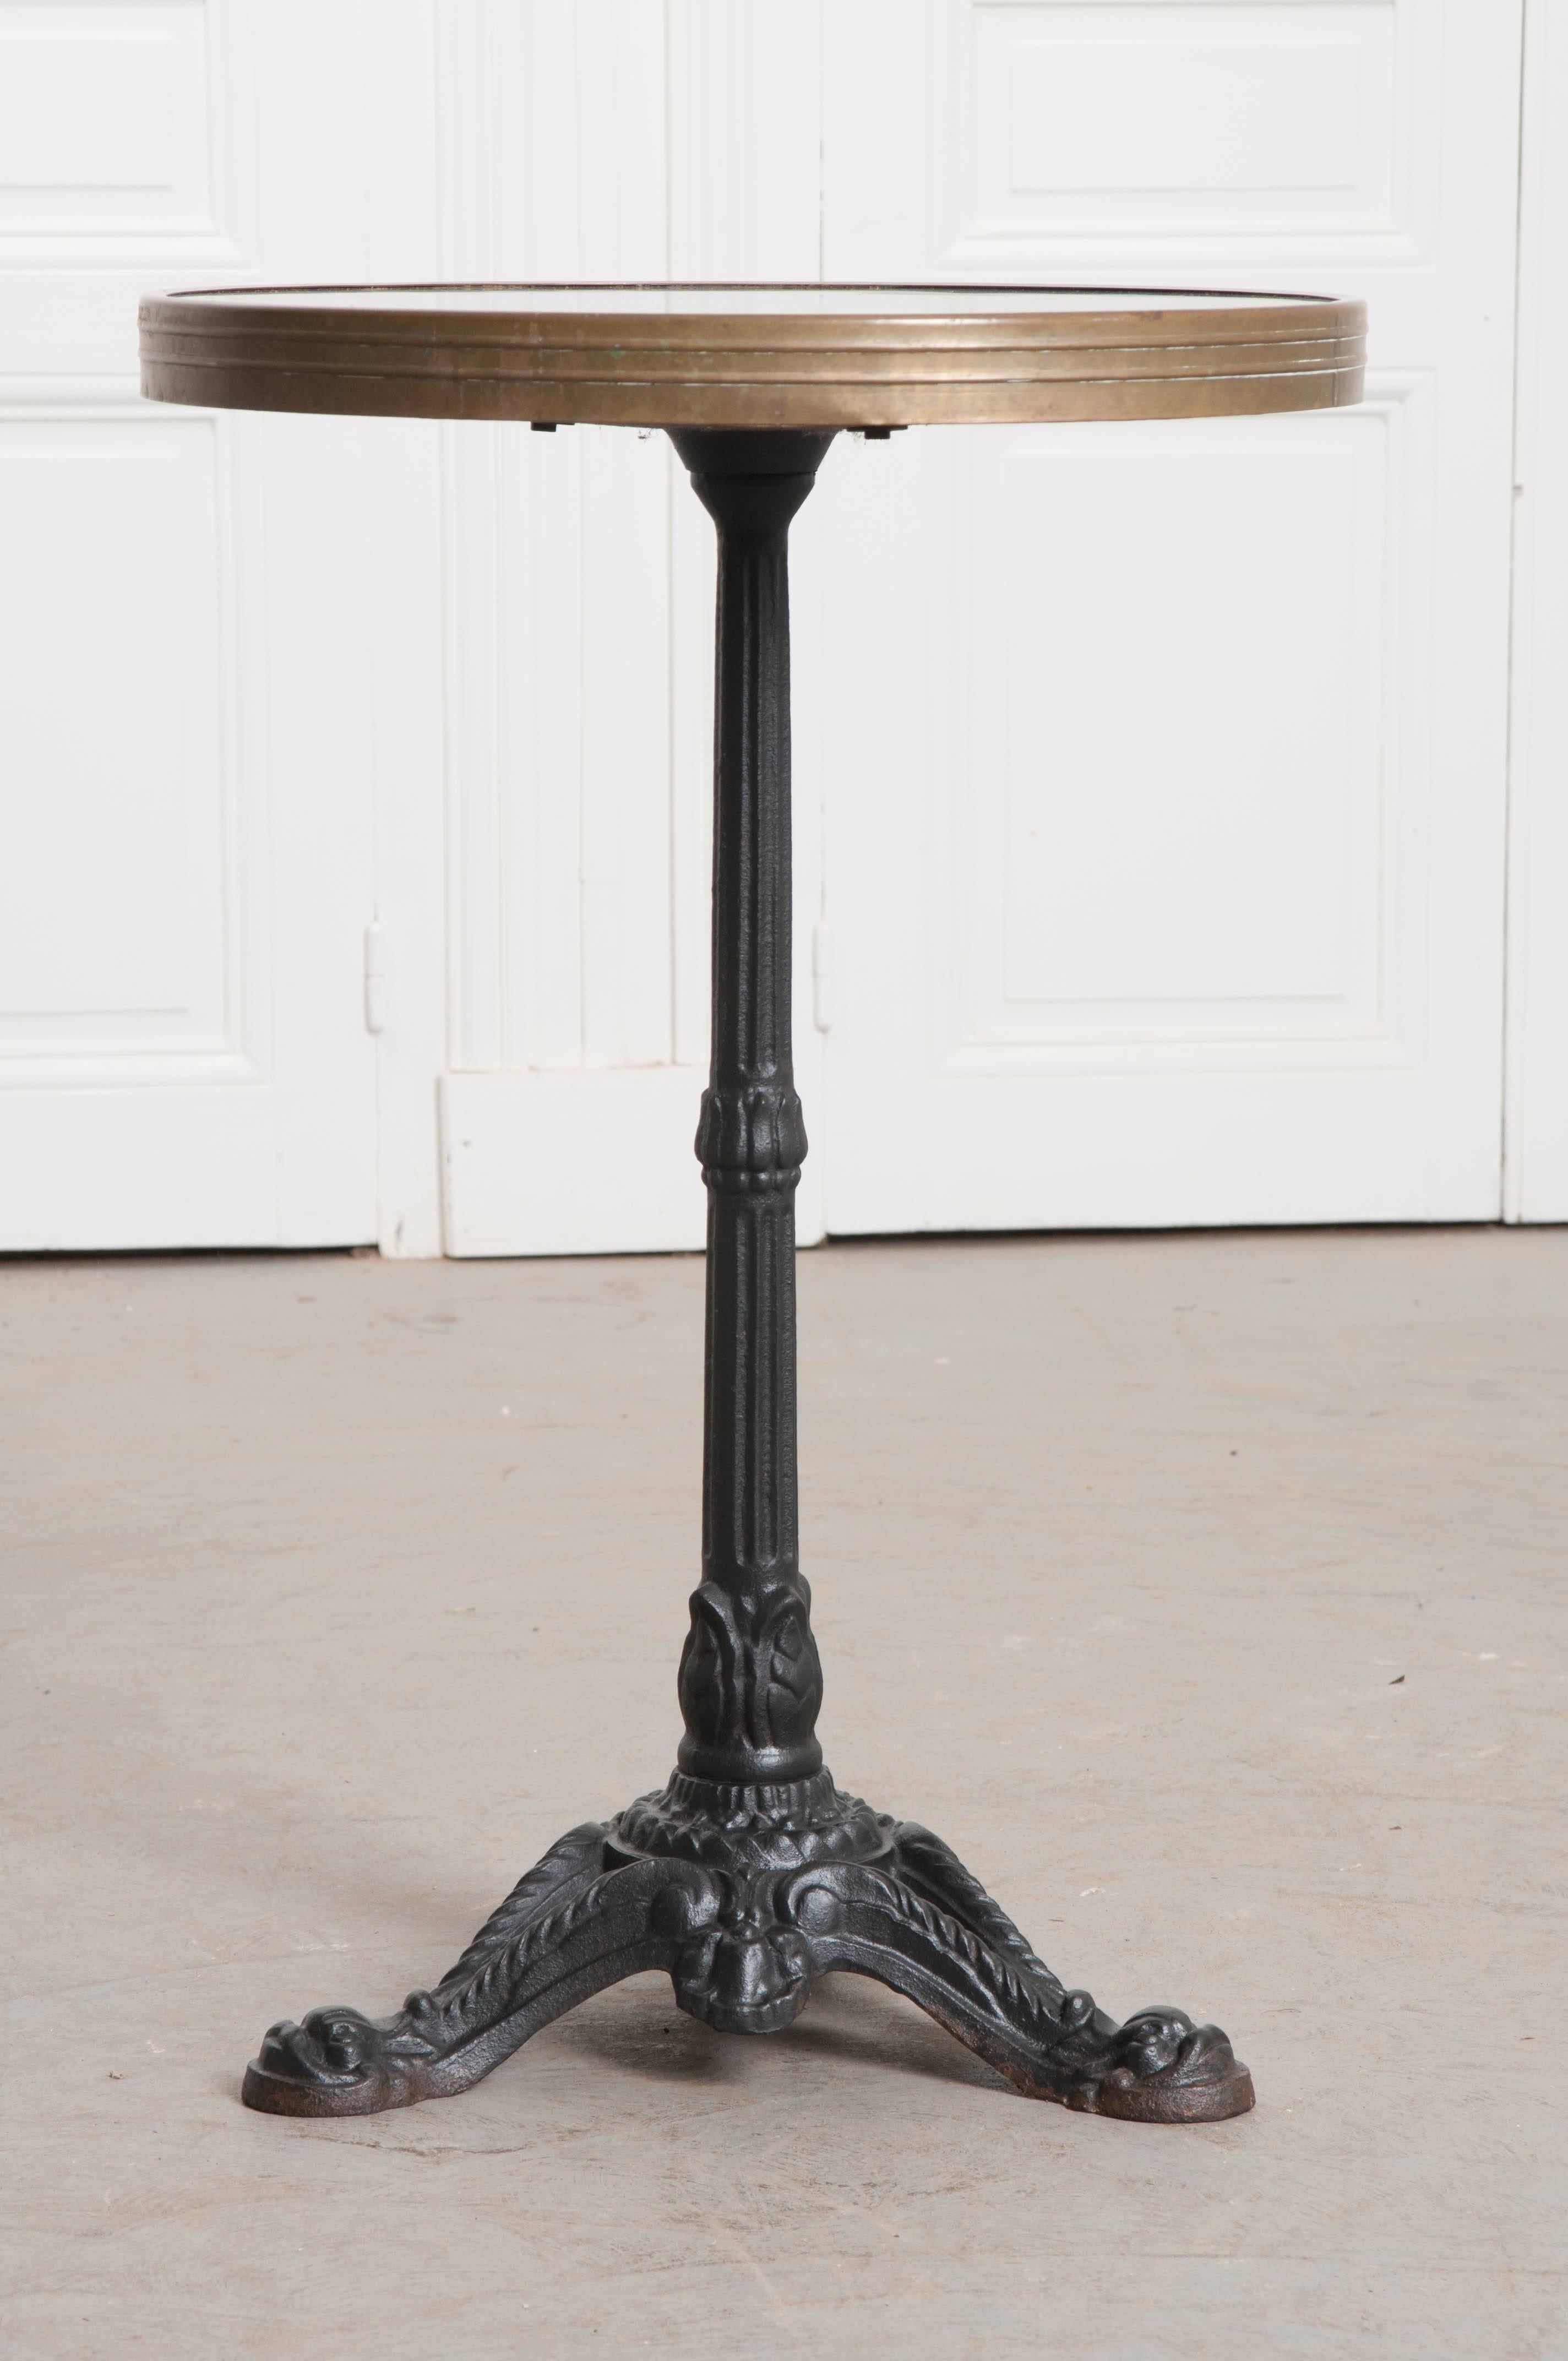 A Classic 1920s French bistro table, done in black. The round top is Bakelite, an early plastic dating back to 1907. It is, in fact, the world’s first synthetic plastic. The wonderfully patinated top is surrounded by a simply styled brass band that